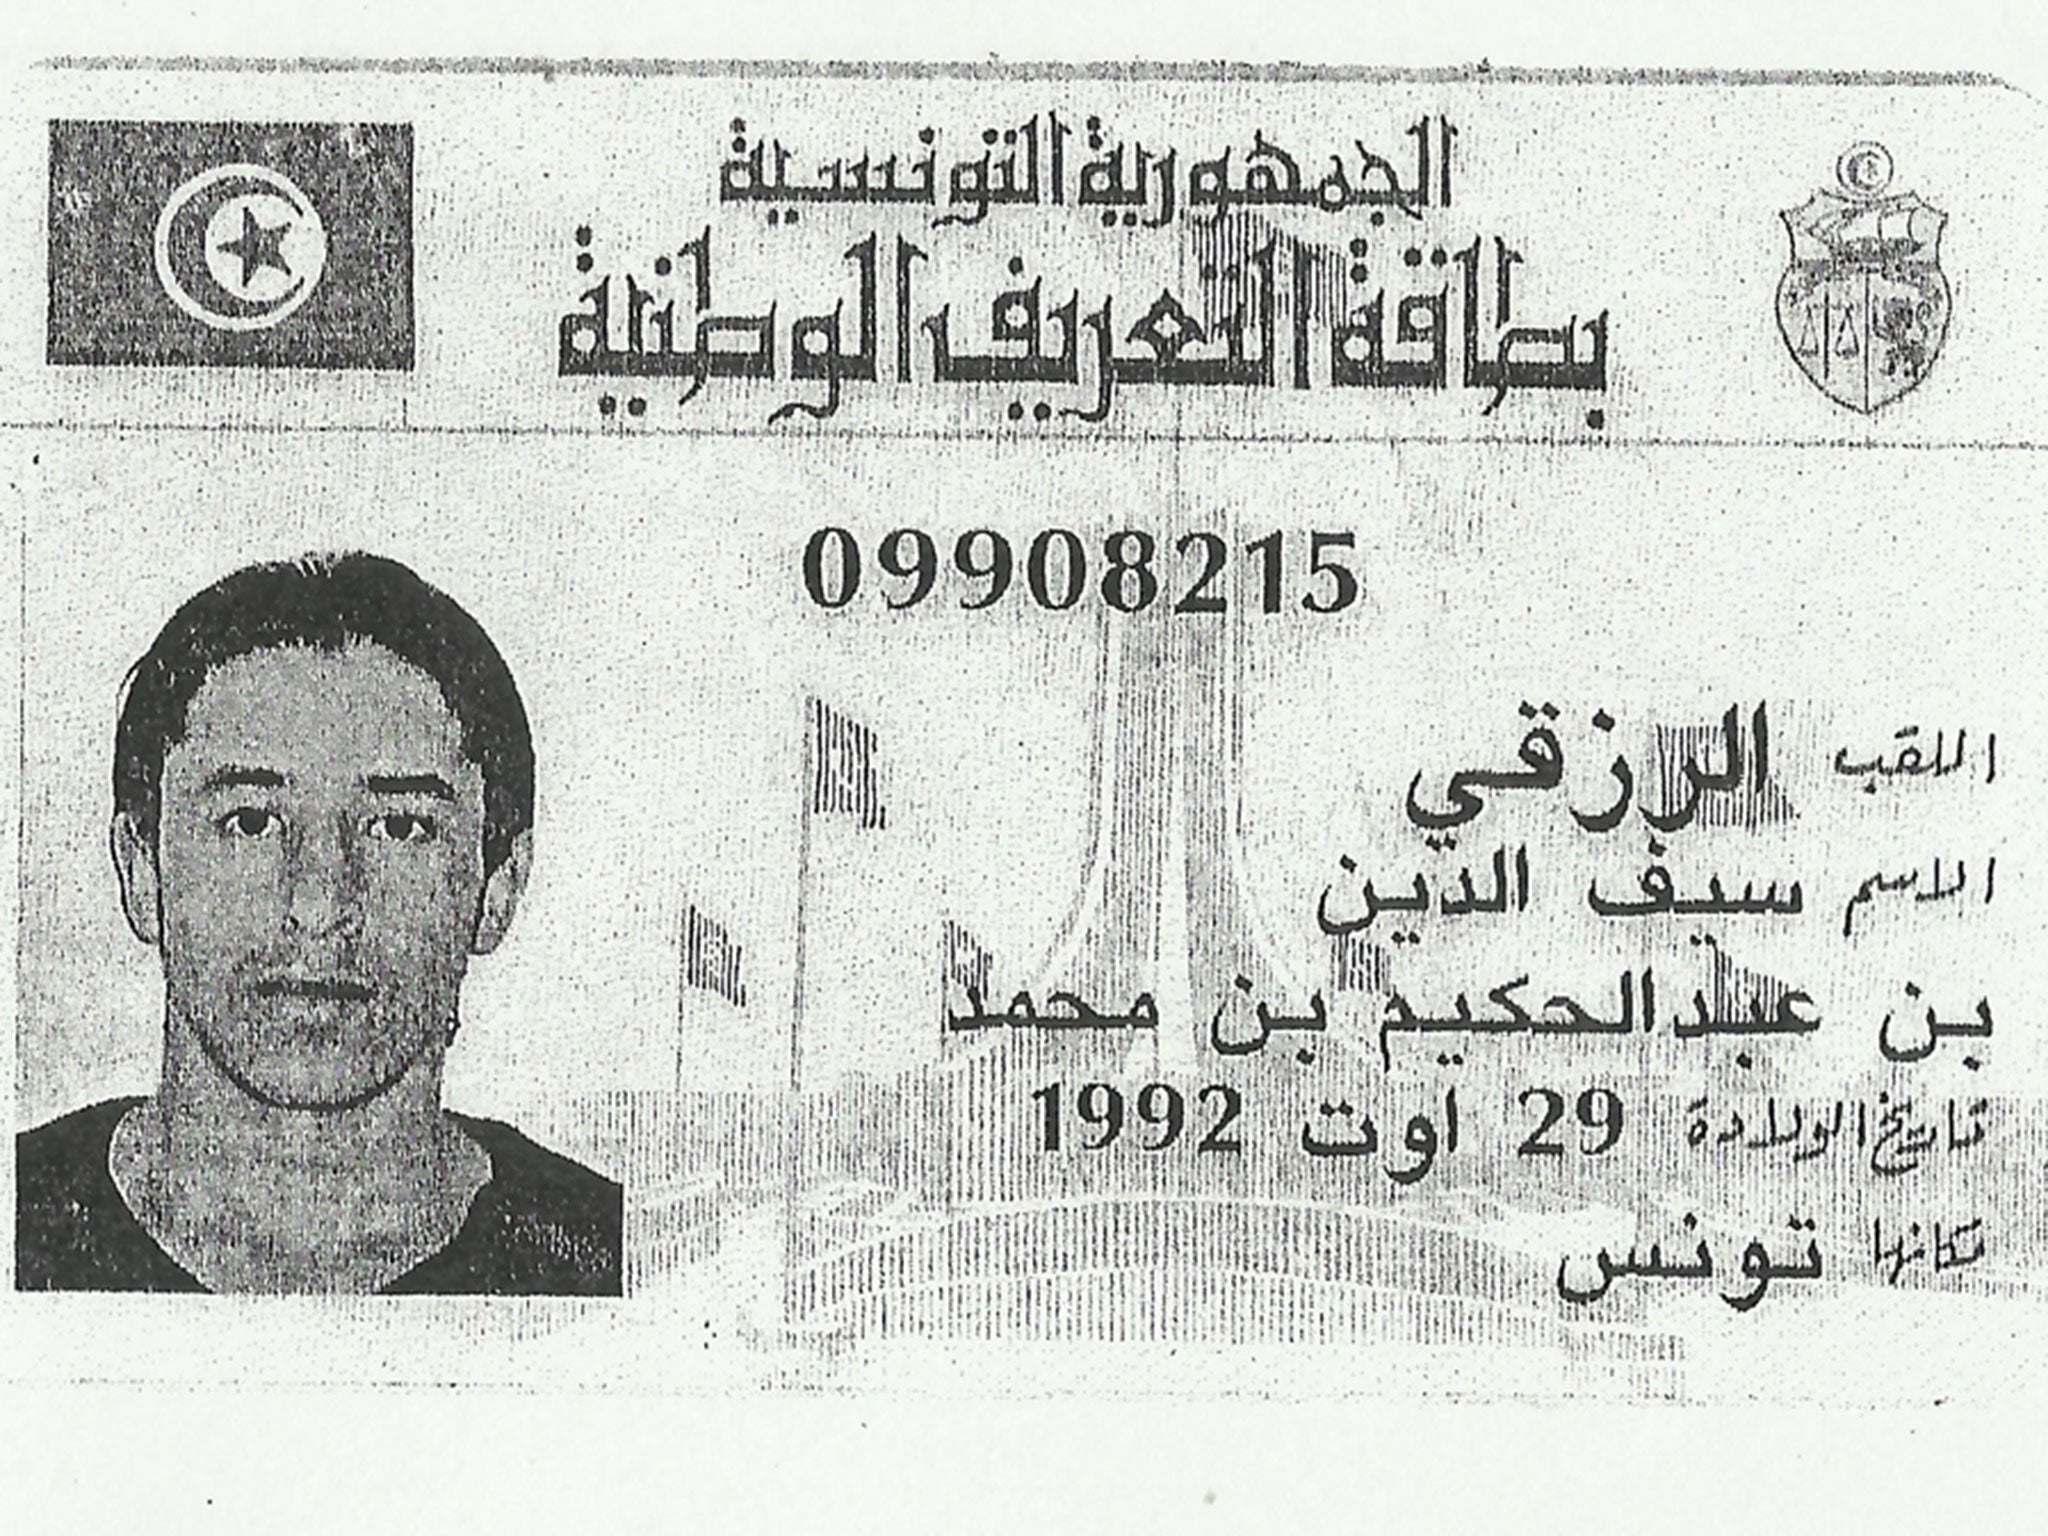 Rezgui’s student ID, found on his body, alerted police to the fact that he was unknown to them